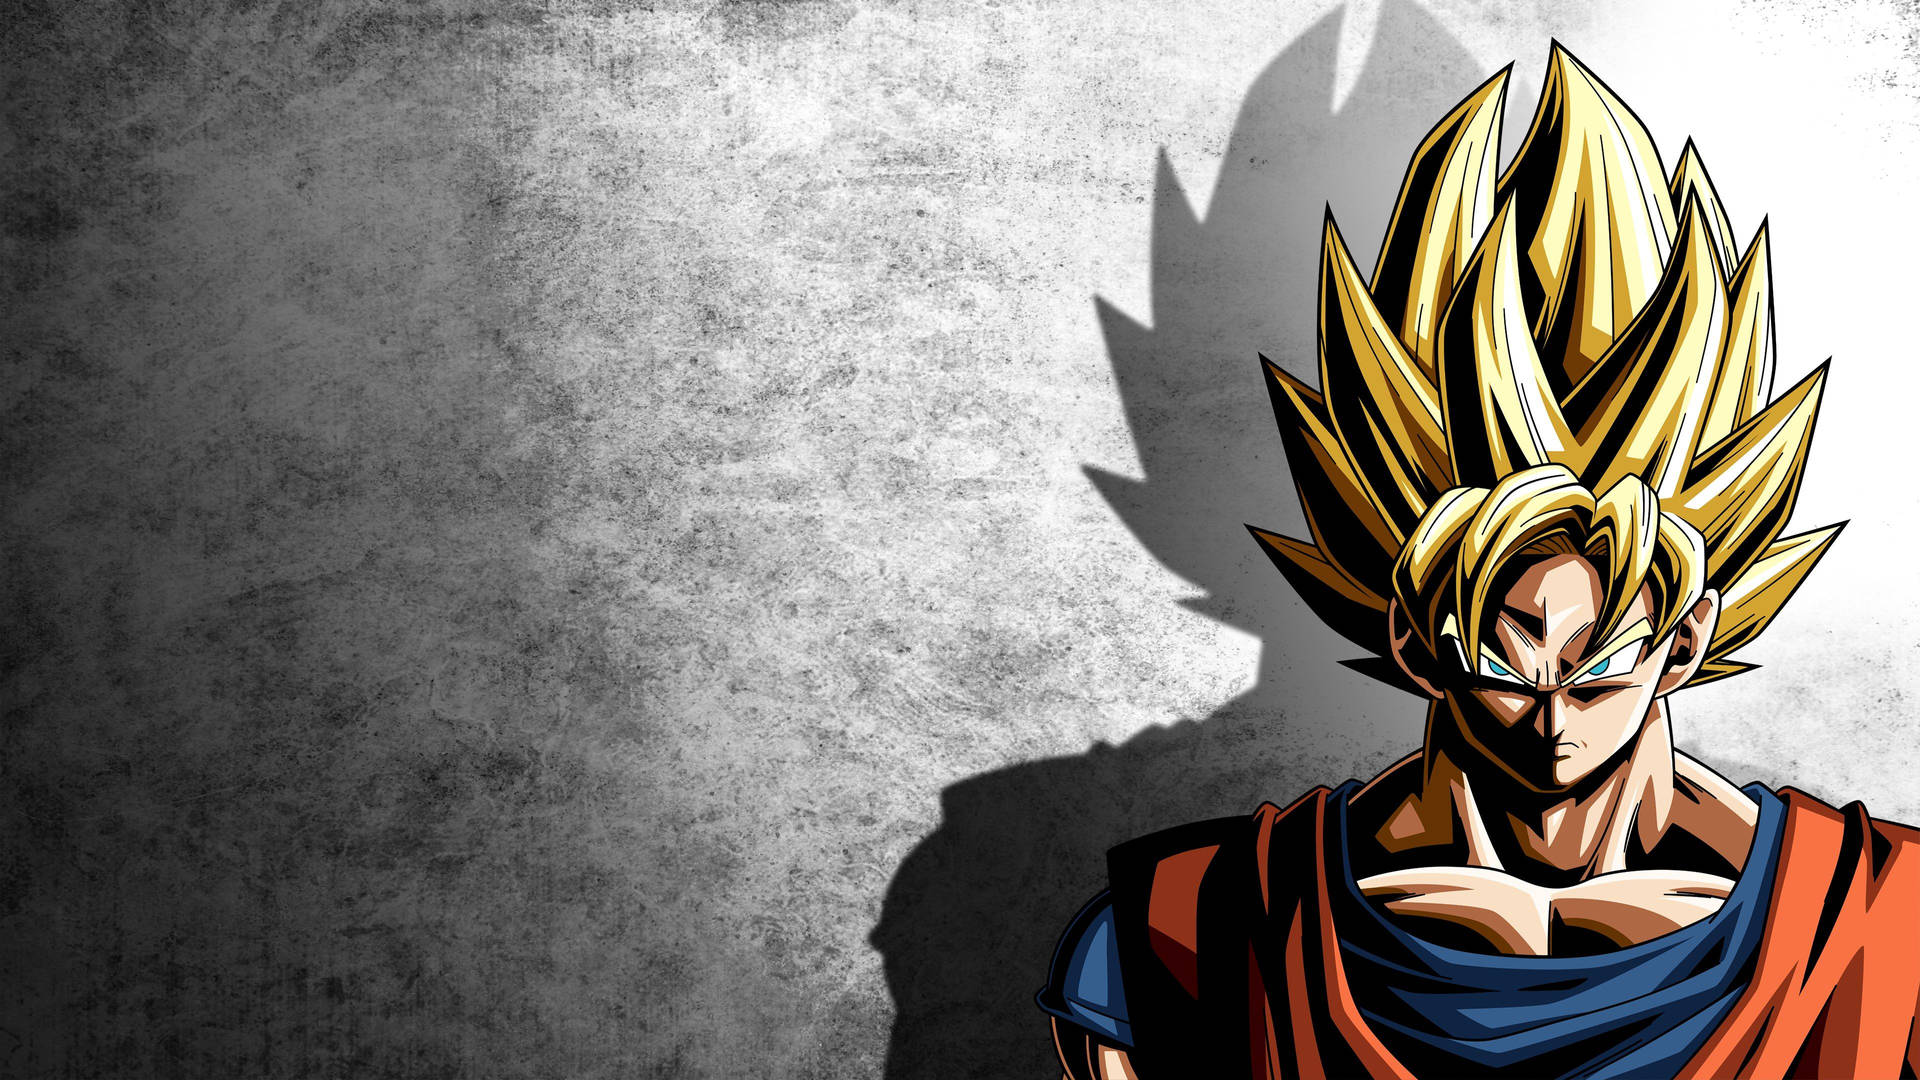 180+ Anime Dragon Ball HD Wallpapers and Backgrounds